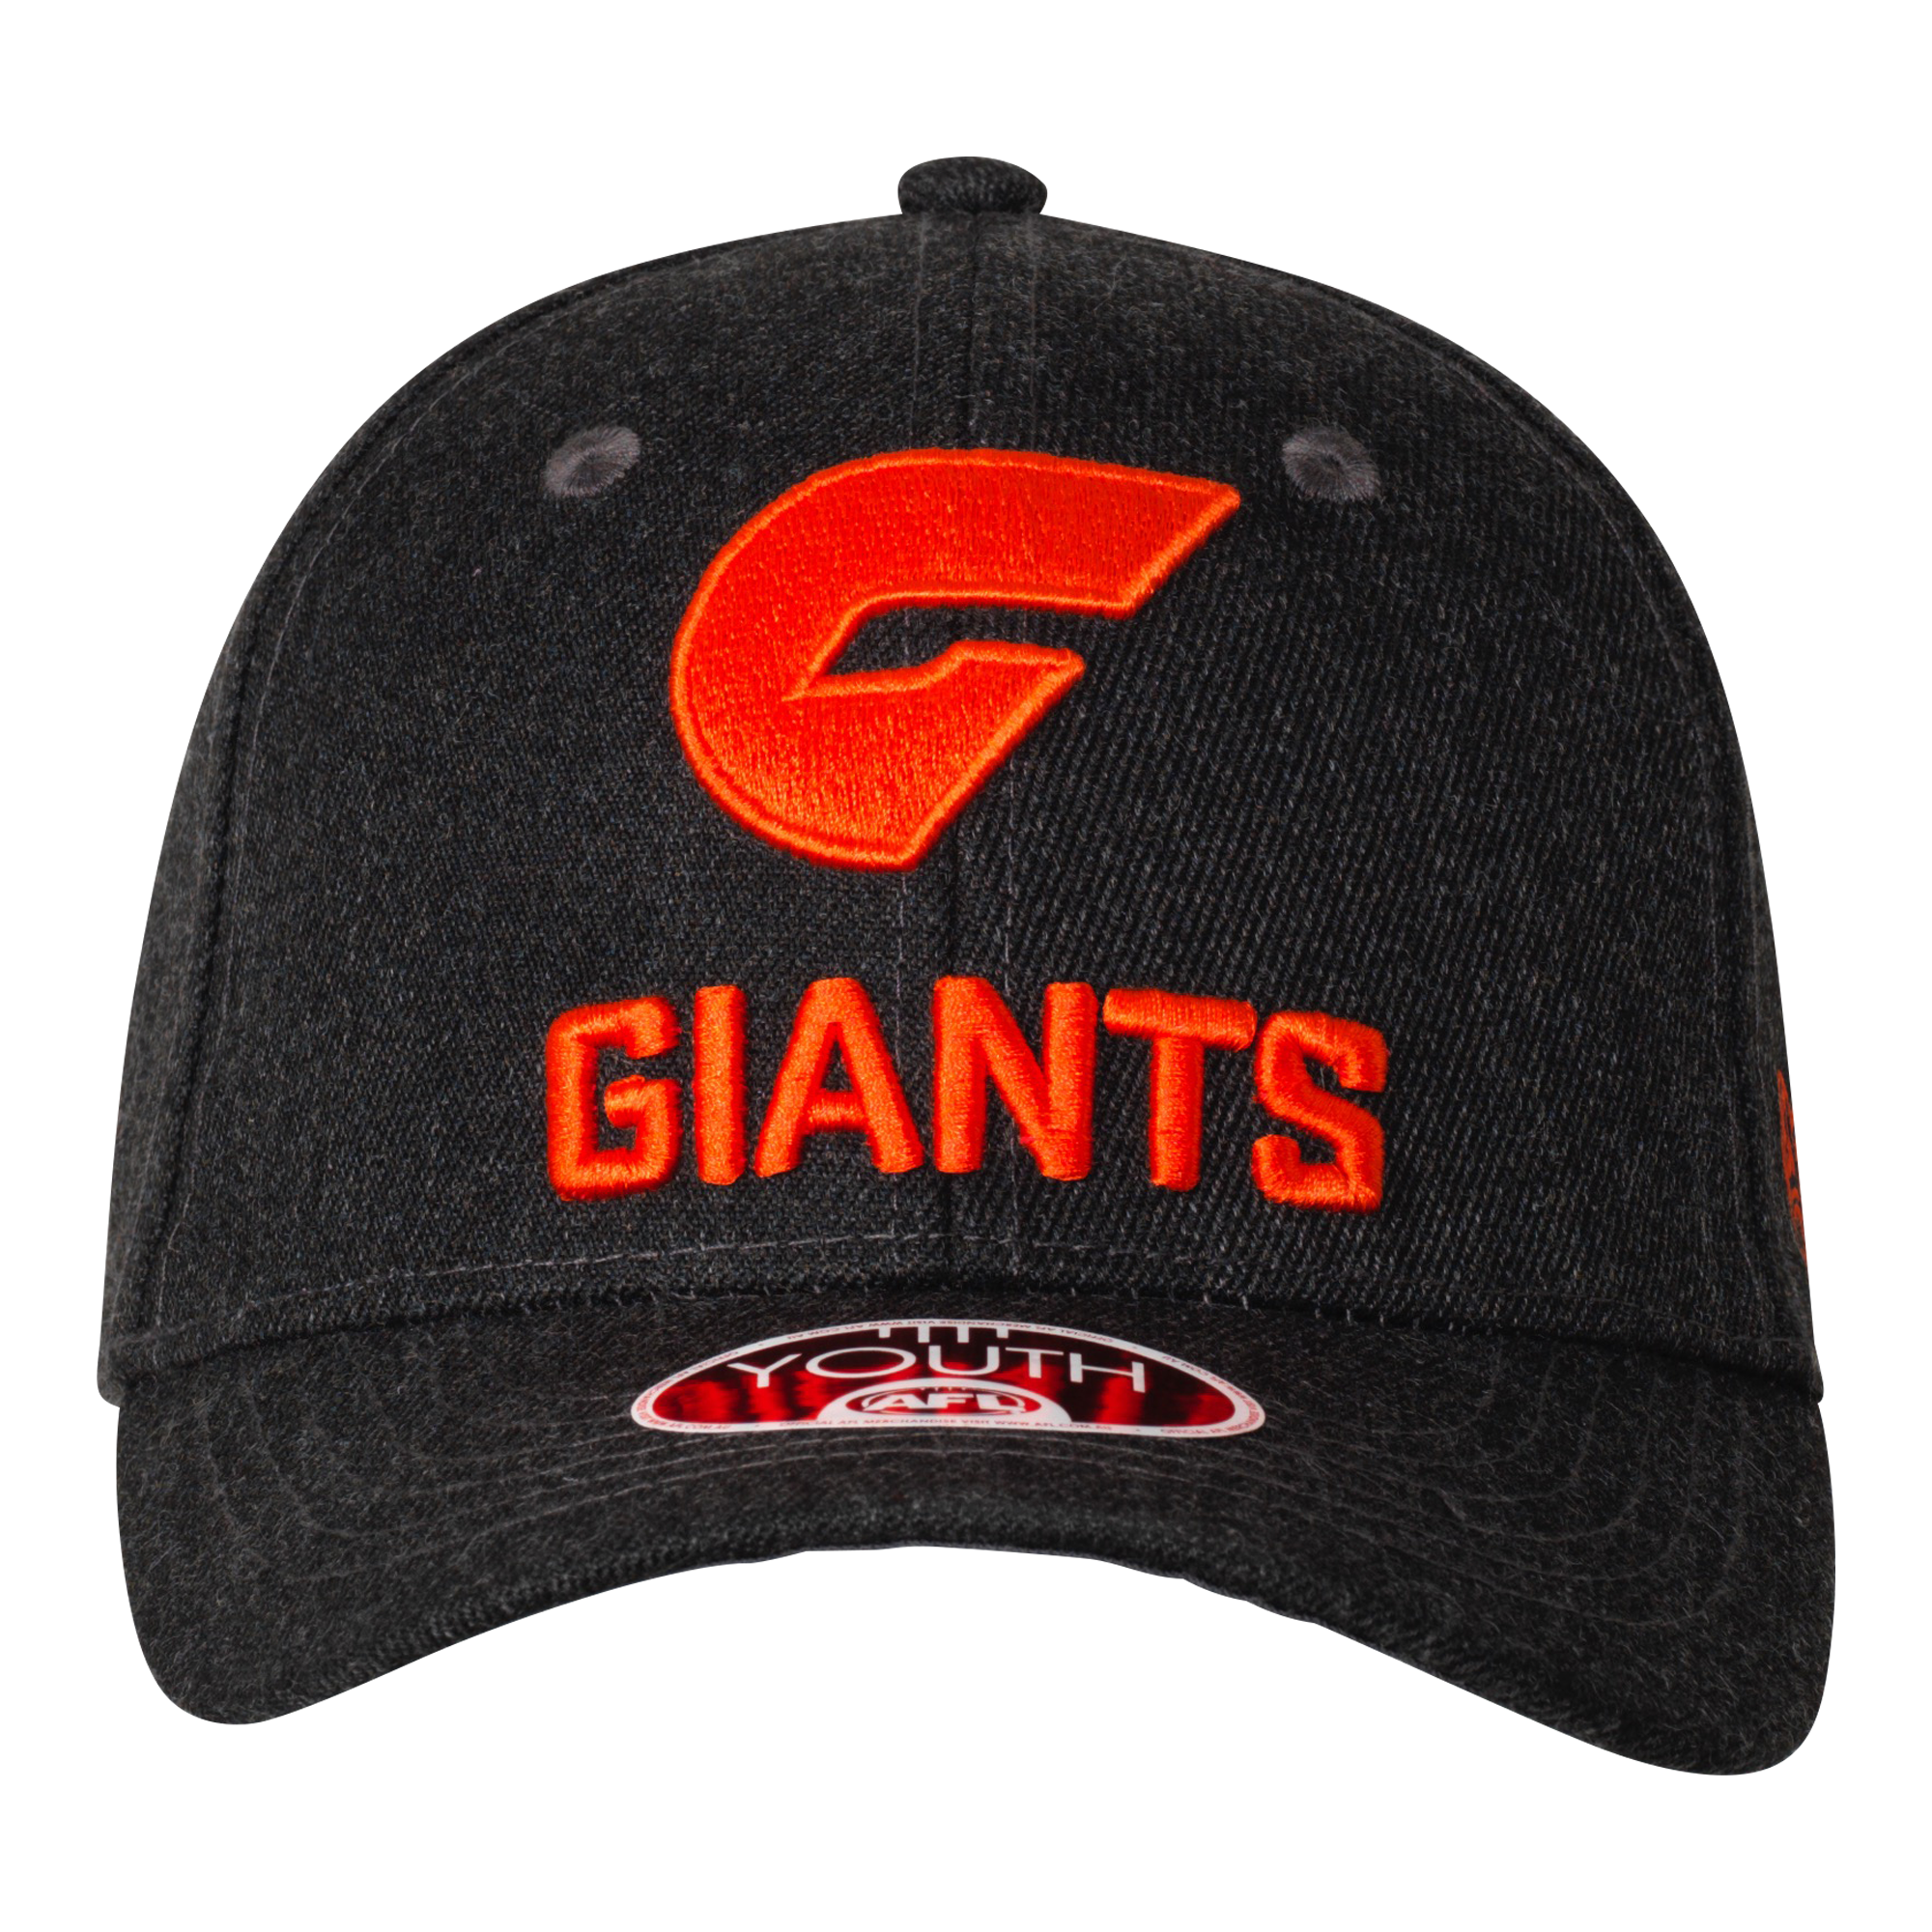 Greater Western Sydney Giants Youth Staple Cap